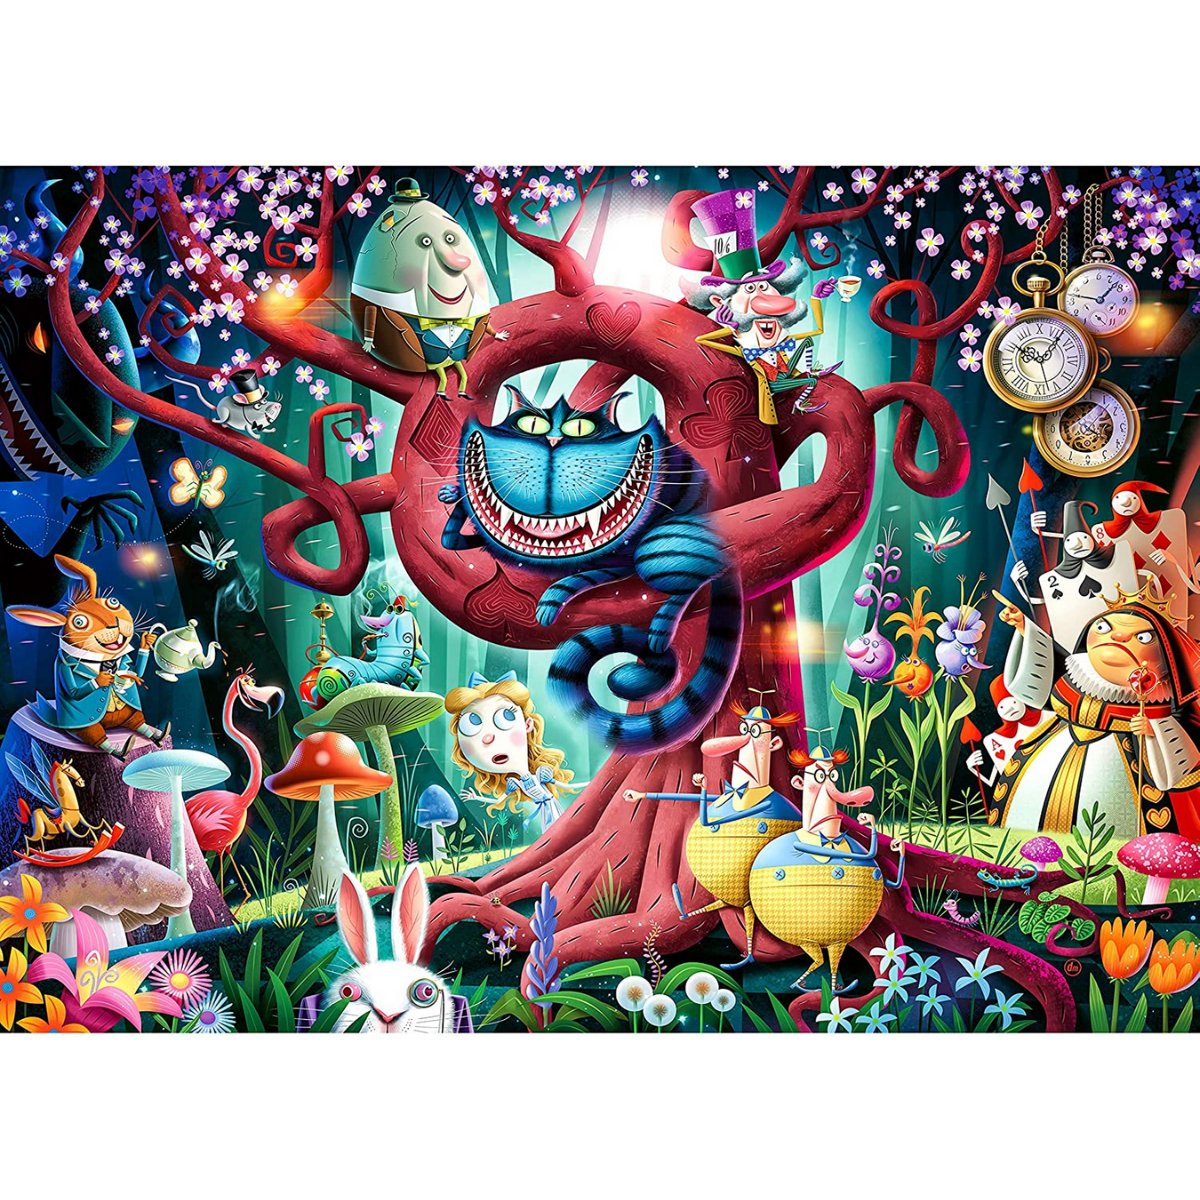 Ravensburger Almost Everyone is Mad (Alice in Wonderland) 1000 Piece Jigsaw Puzzle - Phillips Hobbies